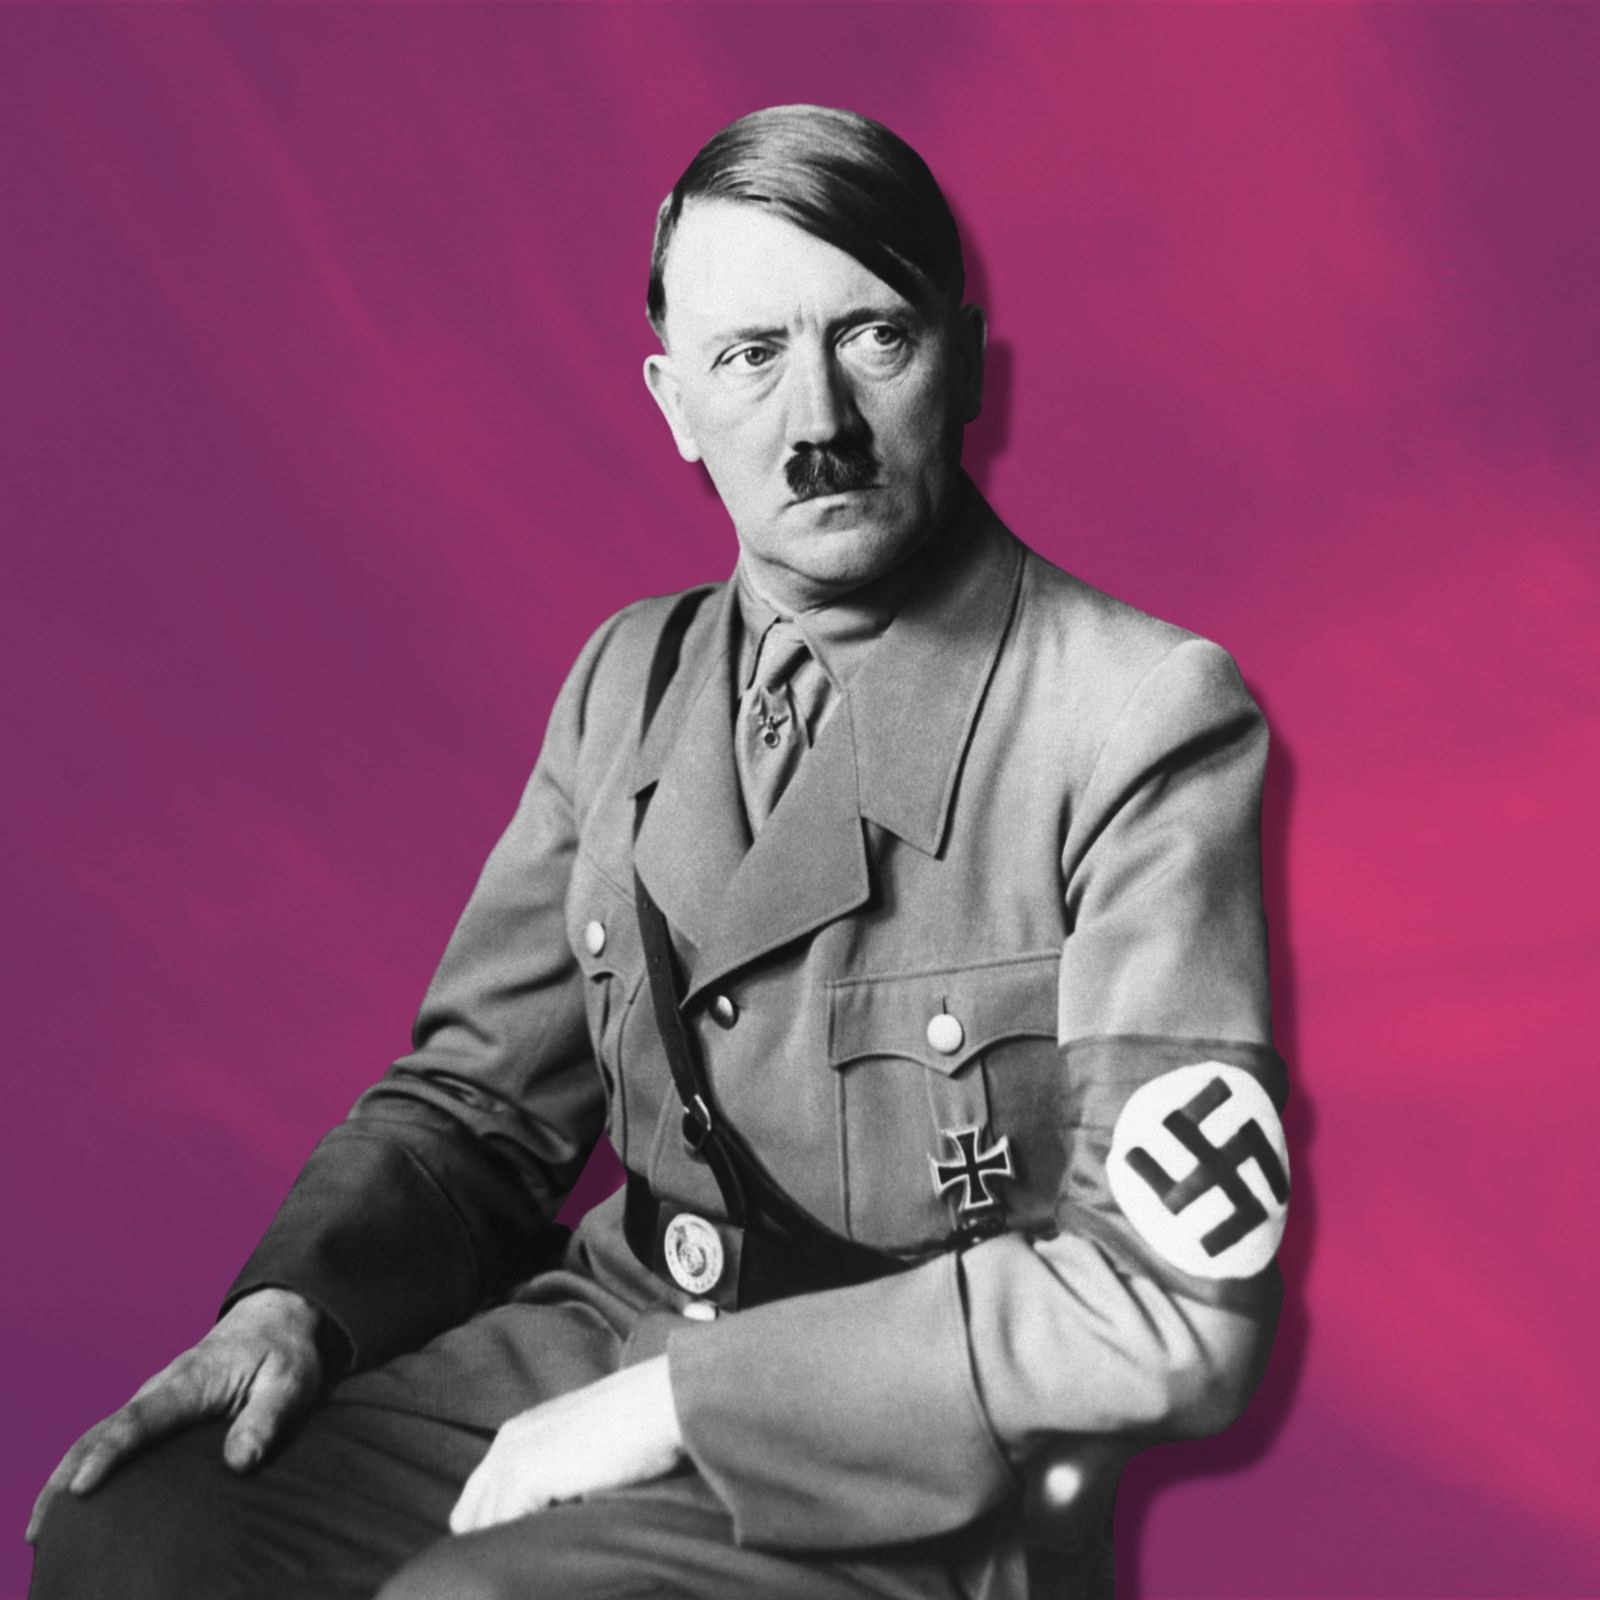 Nazi Wife Porn - Was Adolf Hitler a Pedophile? Breaking Down the Nazi Leader's Perversions